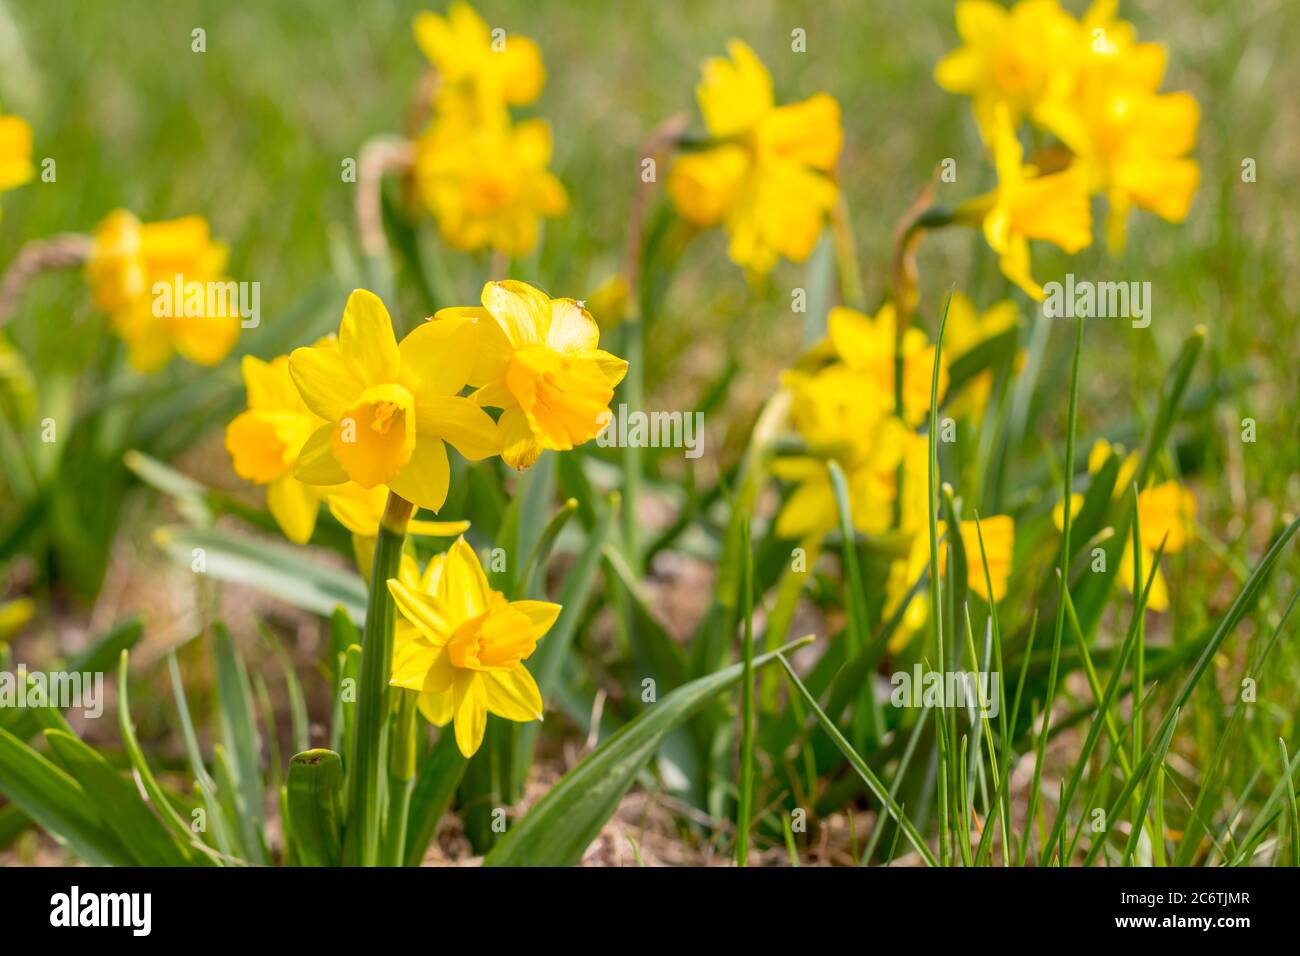 Cyclamen-flowered daffodil Narcissus cyclamineus gold yellow flowers Stock Photo